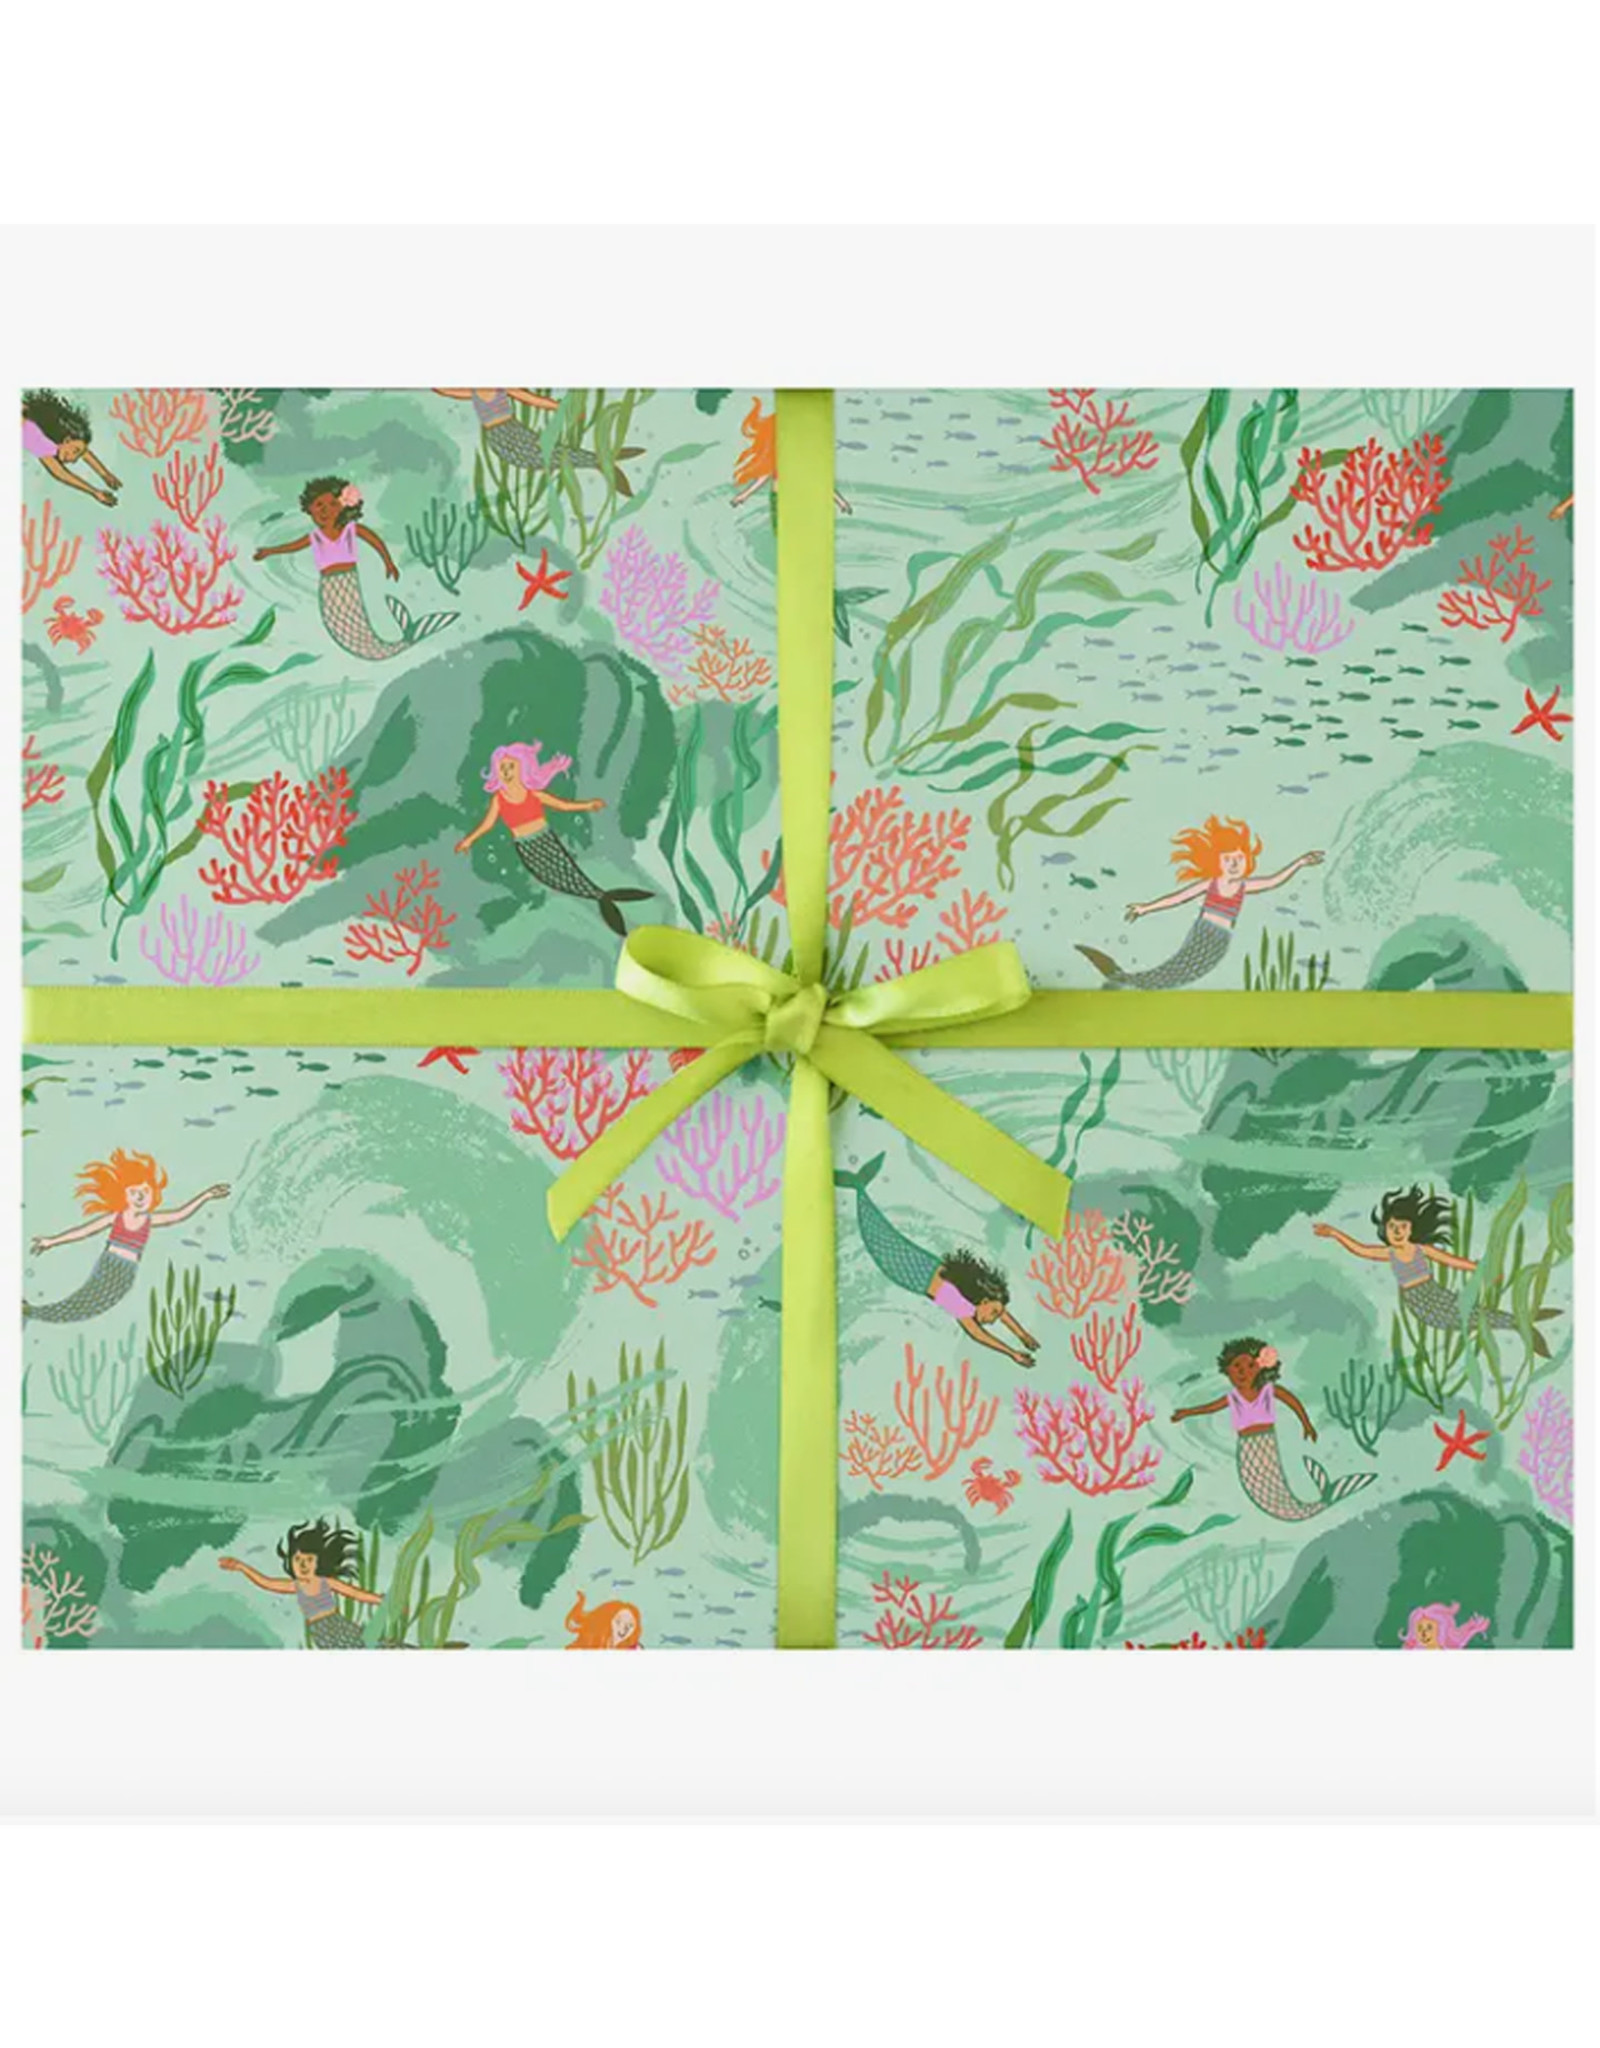 Mermaids Gift Wrapping Paper - Curbside Pick-Up Only